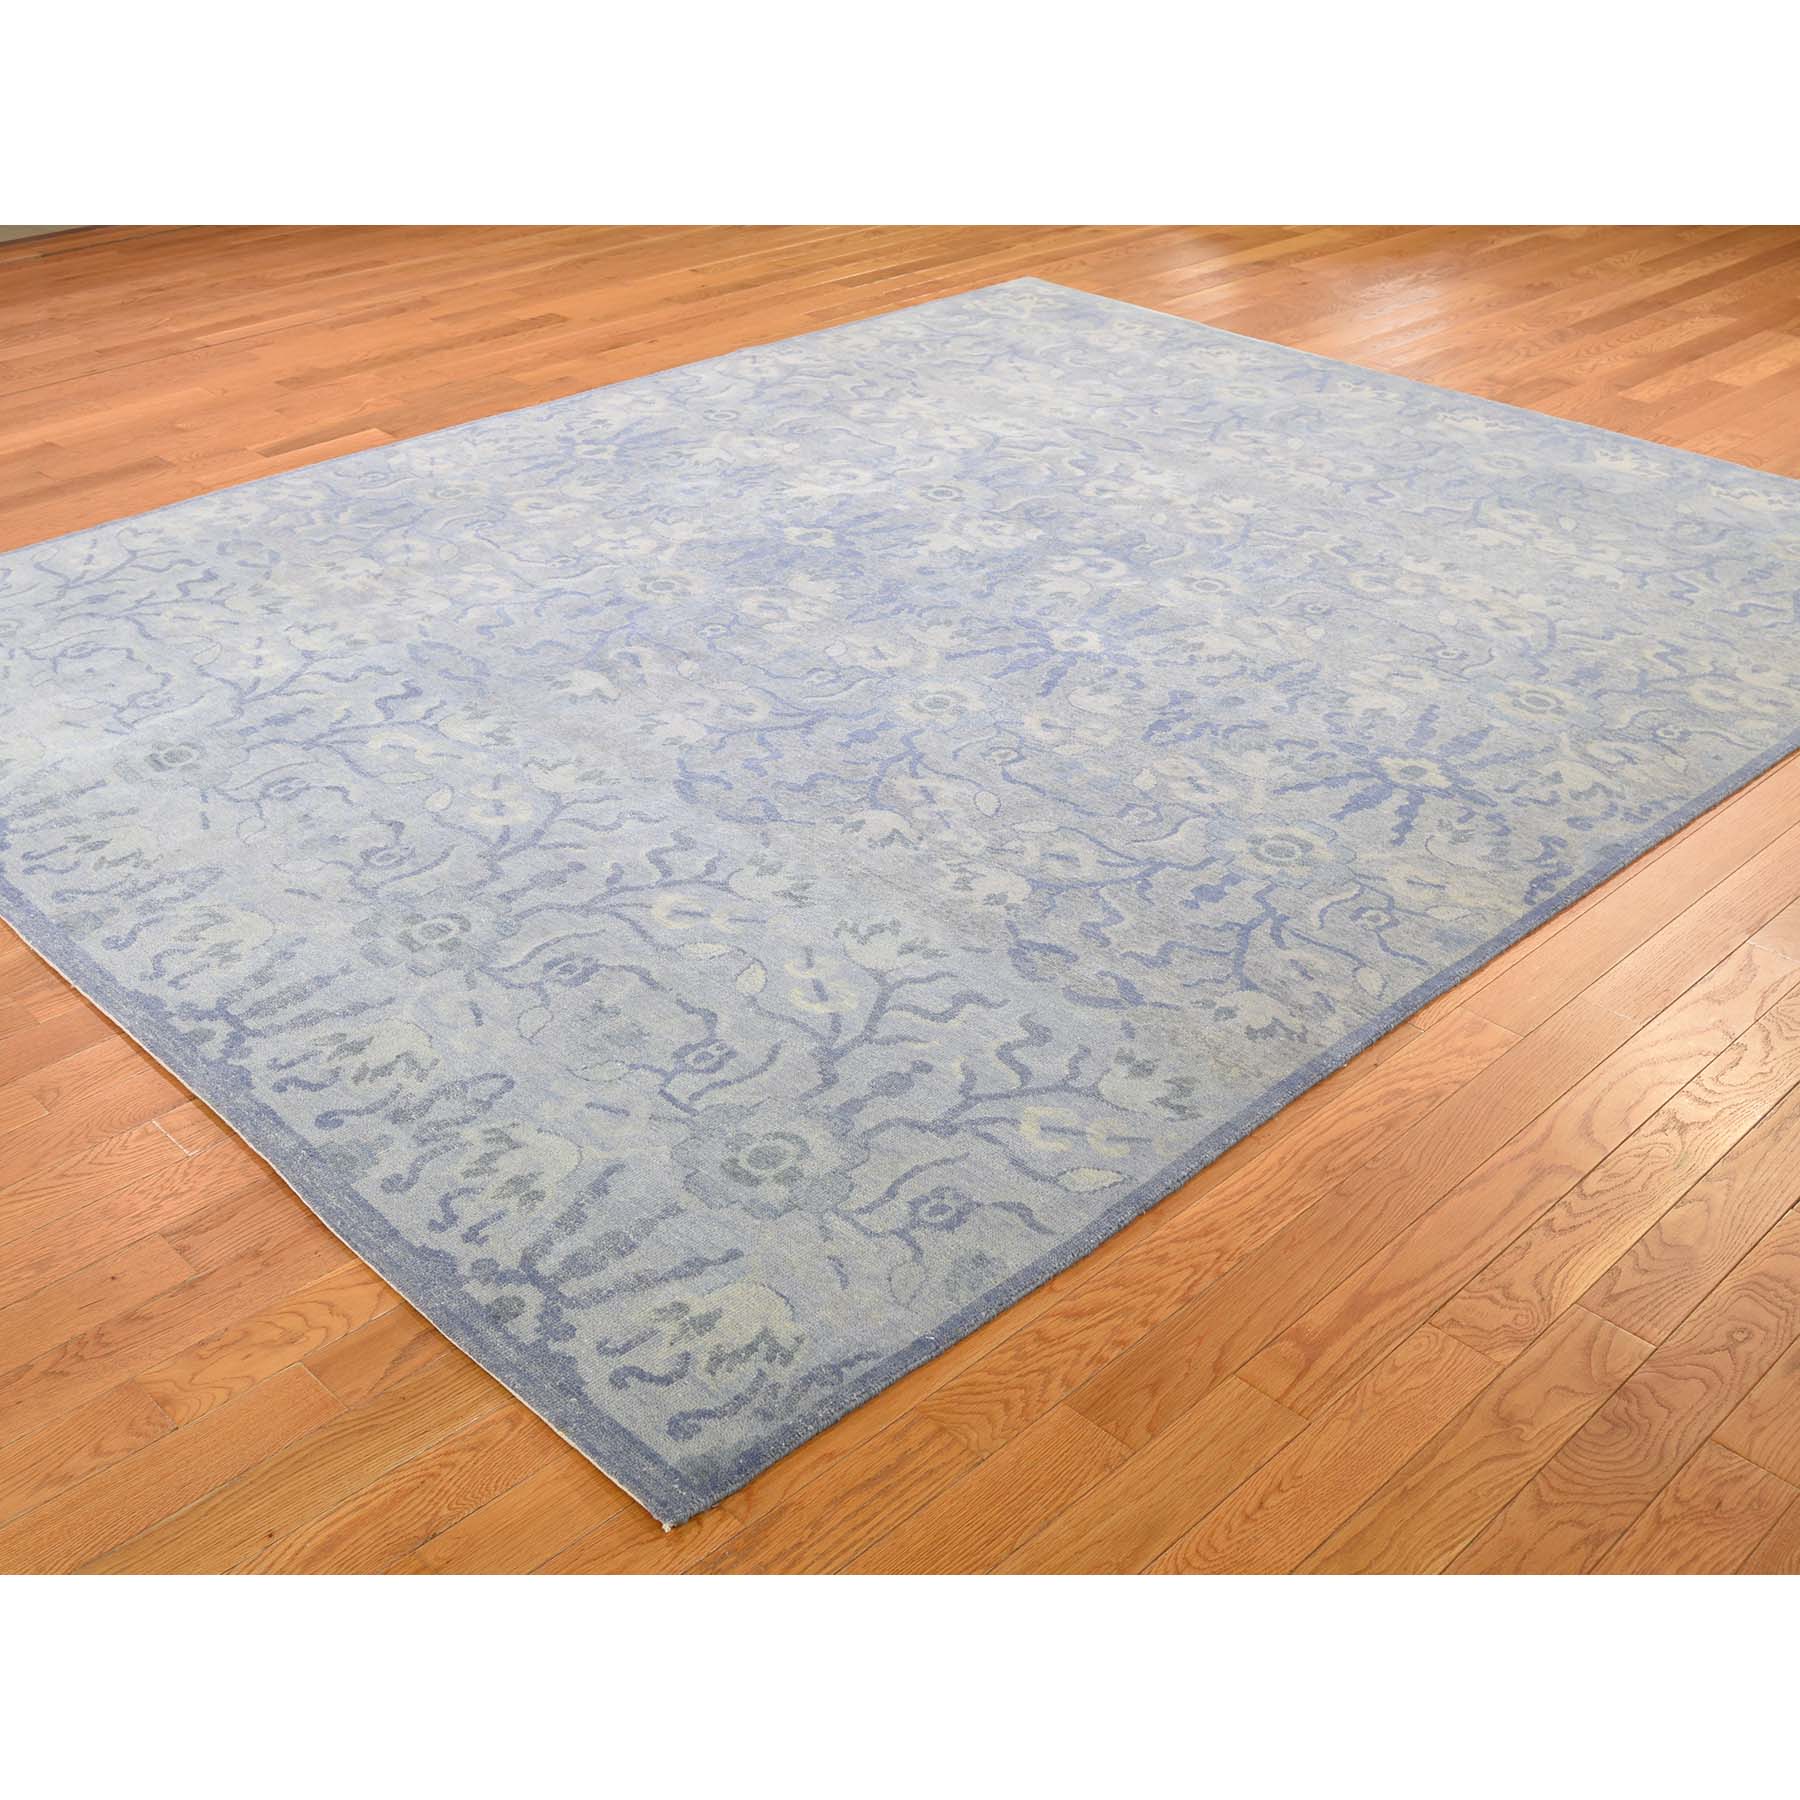 8-x9-10  Modern Light Blue Tone on Tone Pure Wool Hand-Knotted Oriental Rug 